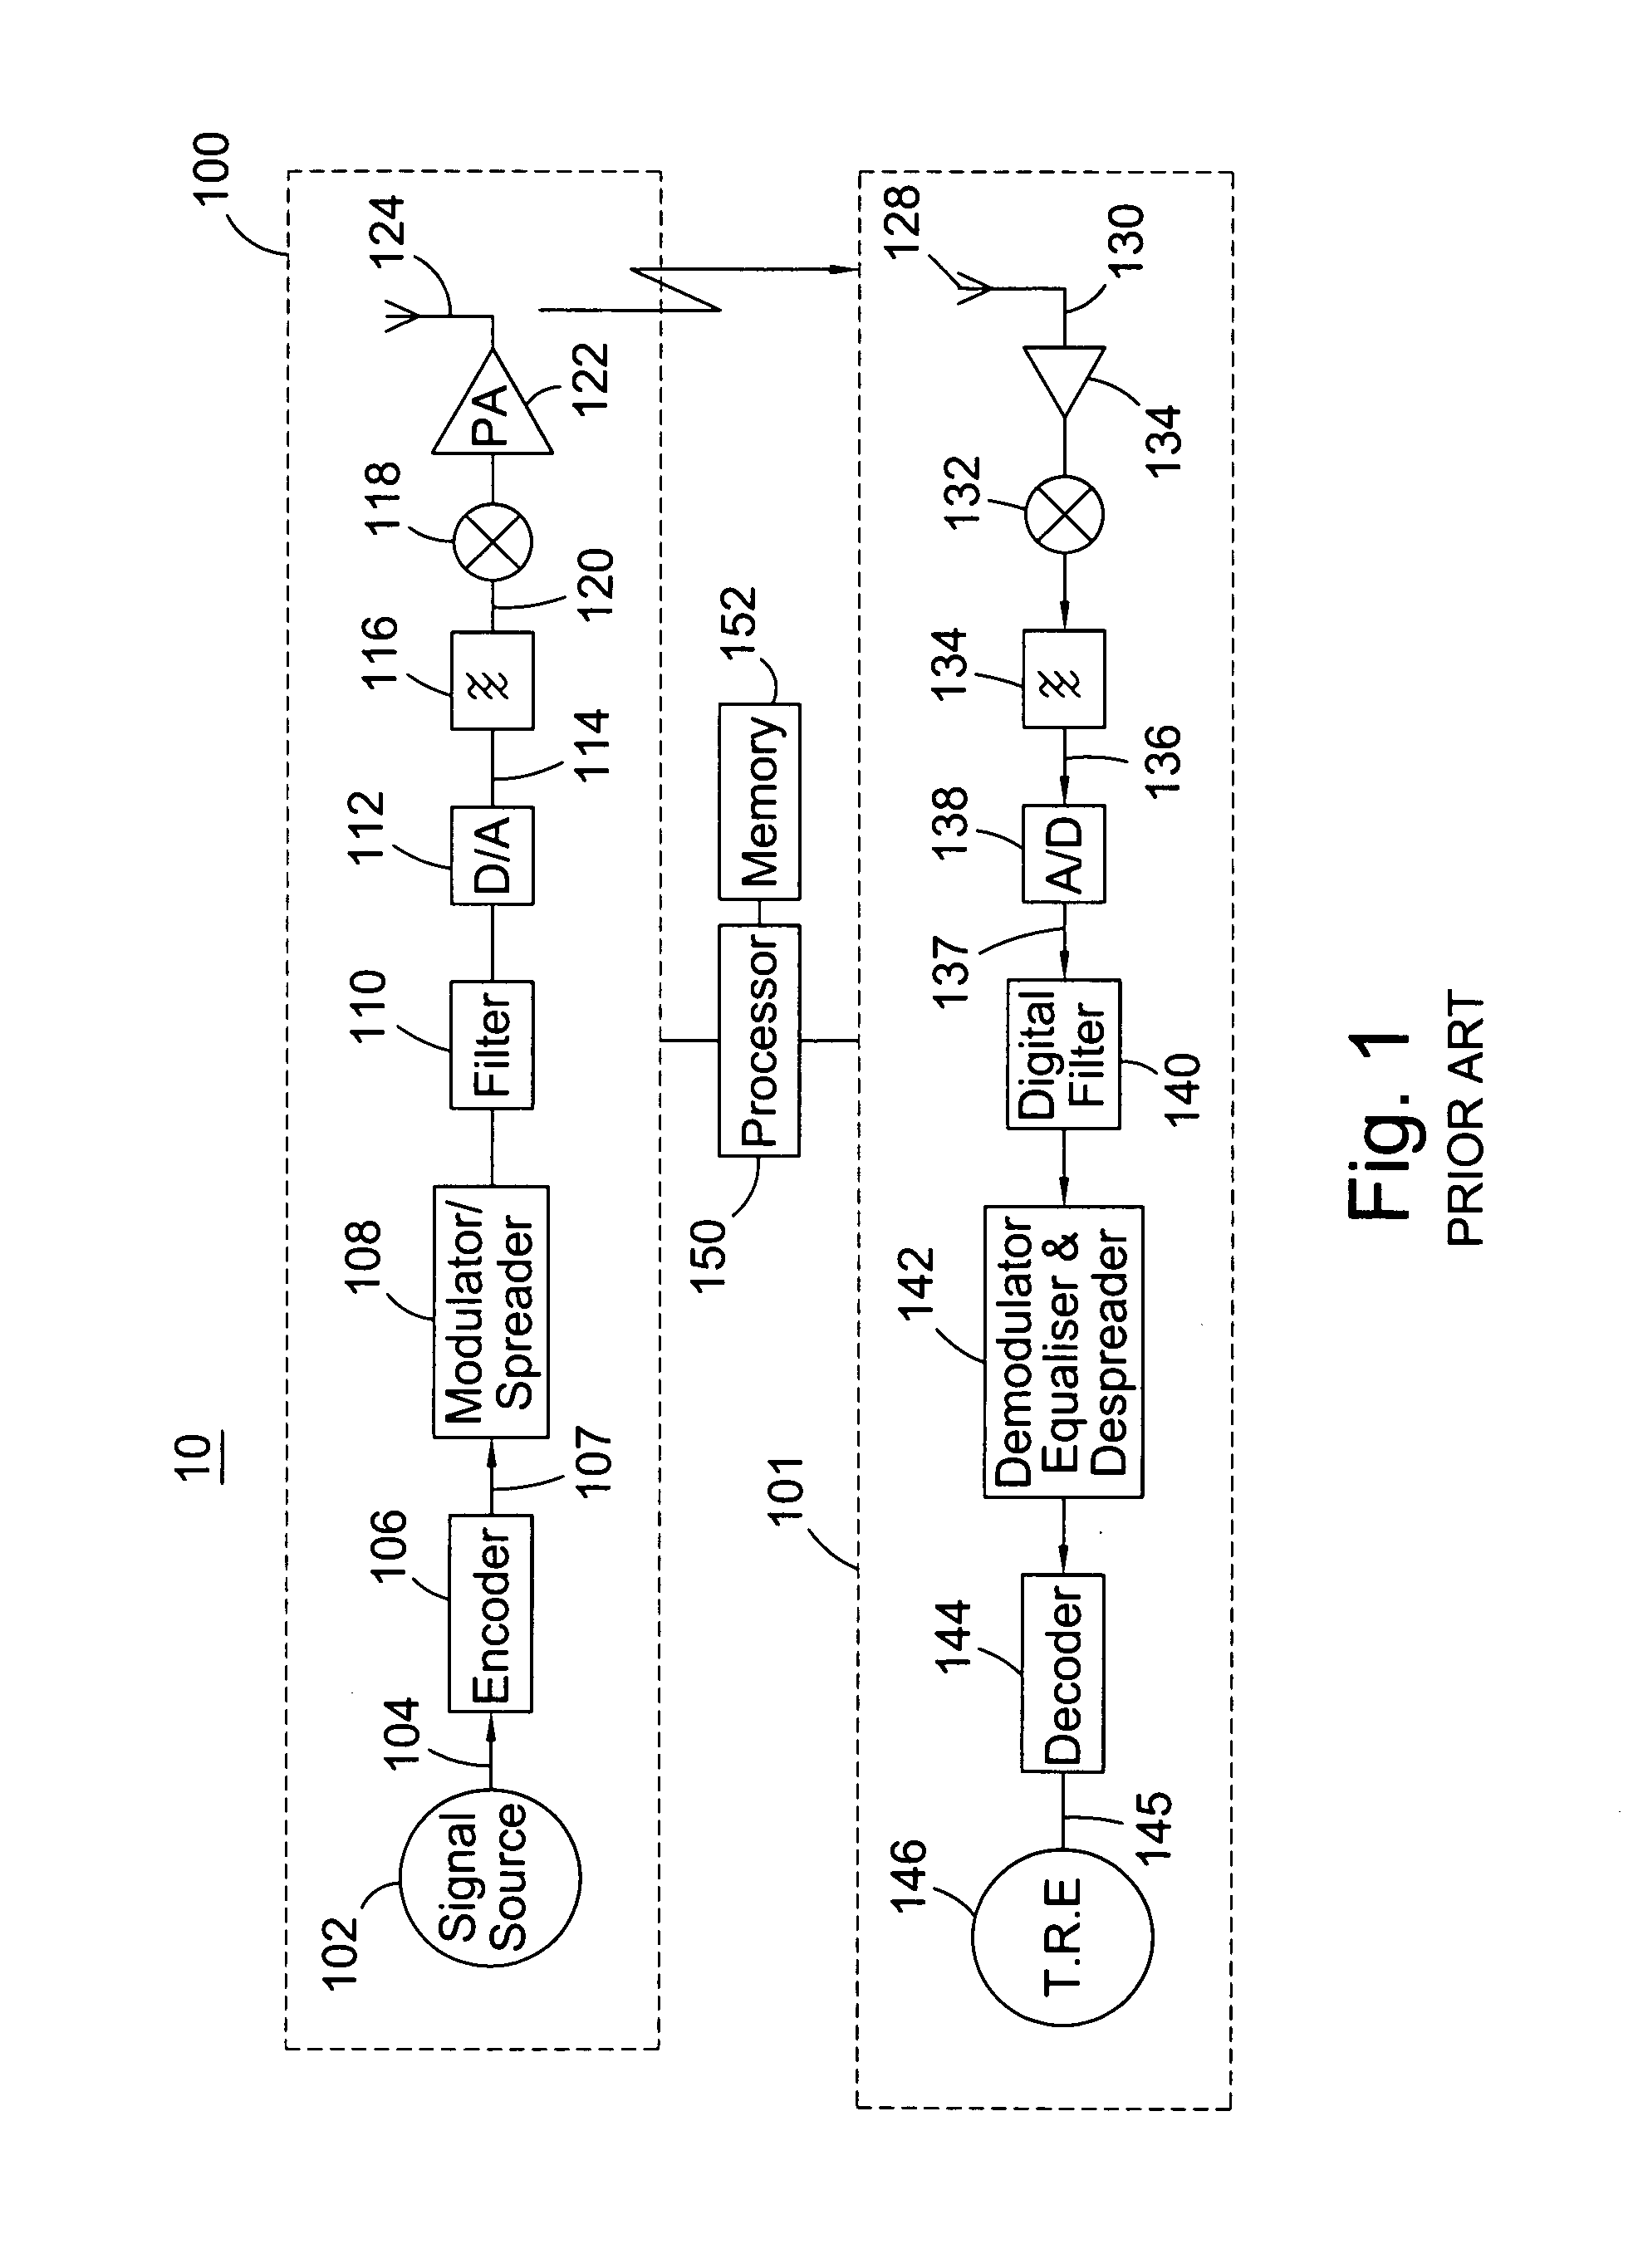 Communication system and methods of estimating channel impulse responses therein